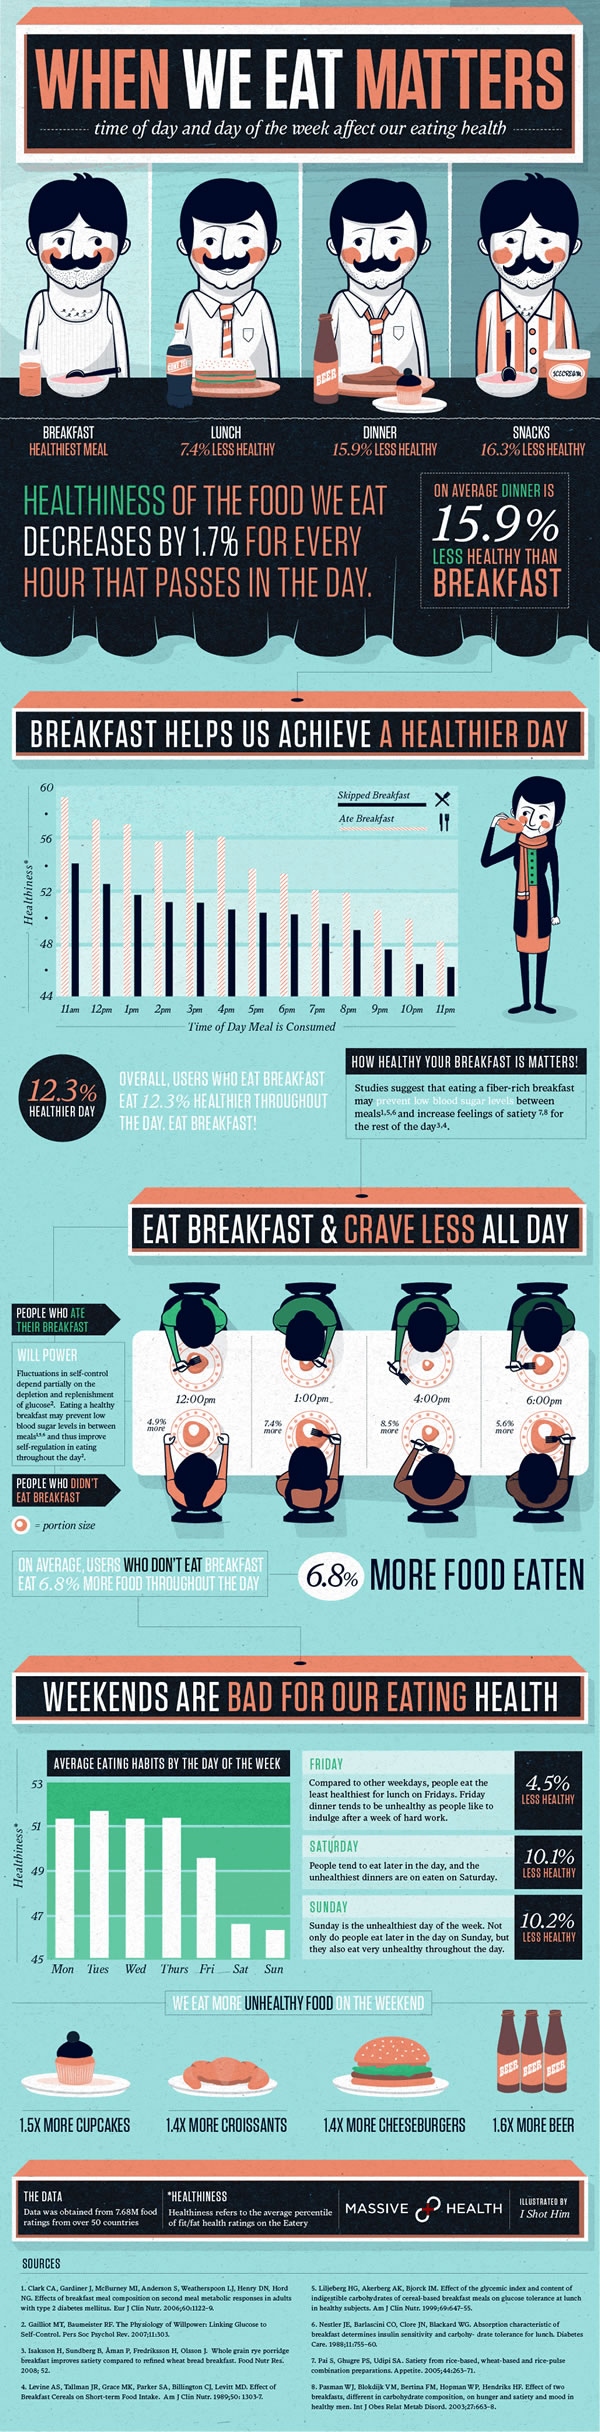 Consumers That Eat Breakfast